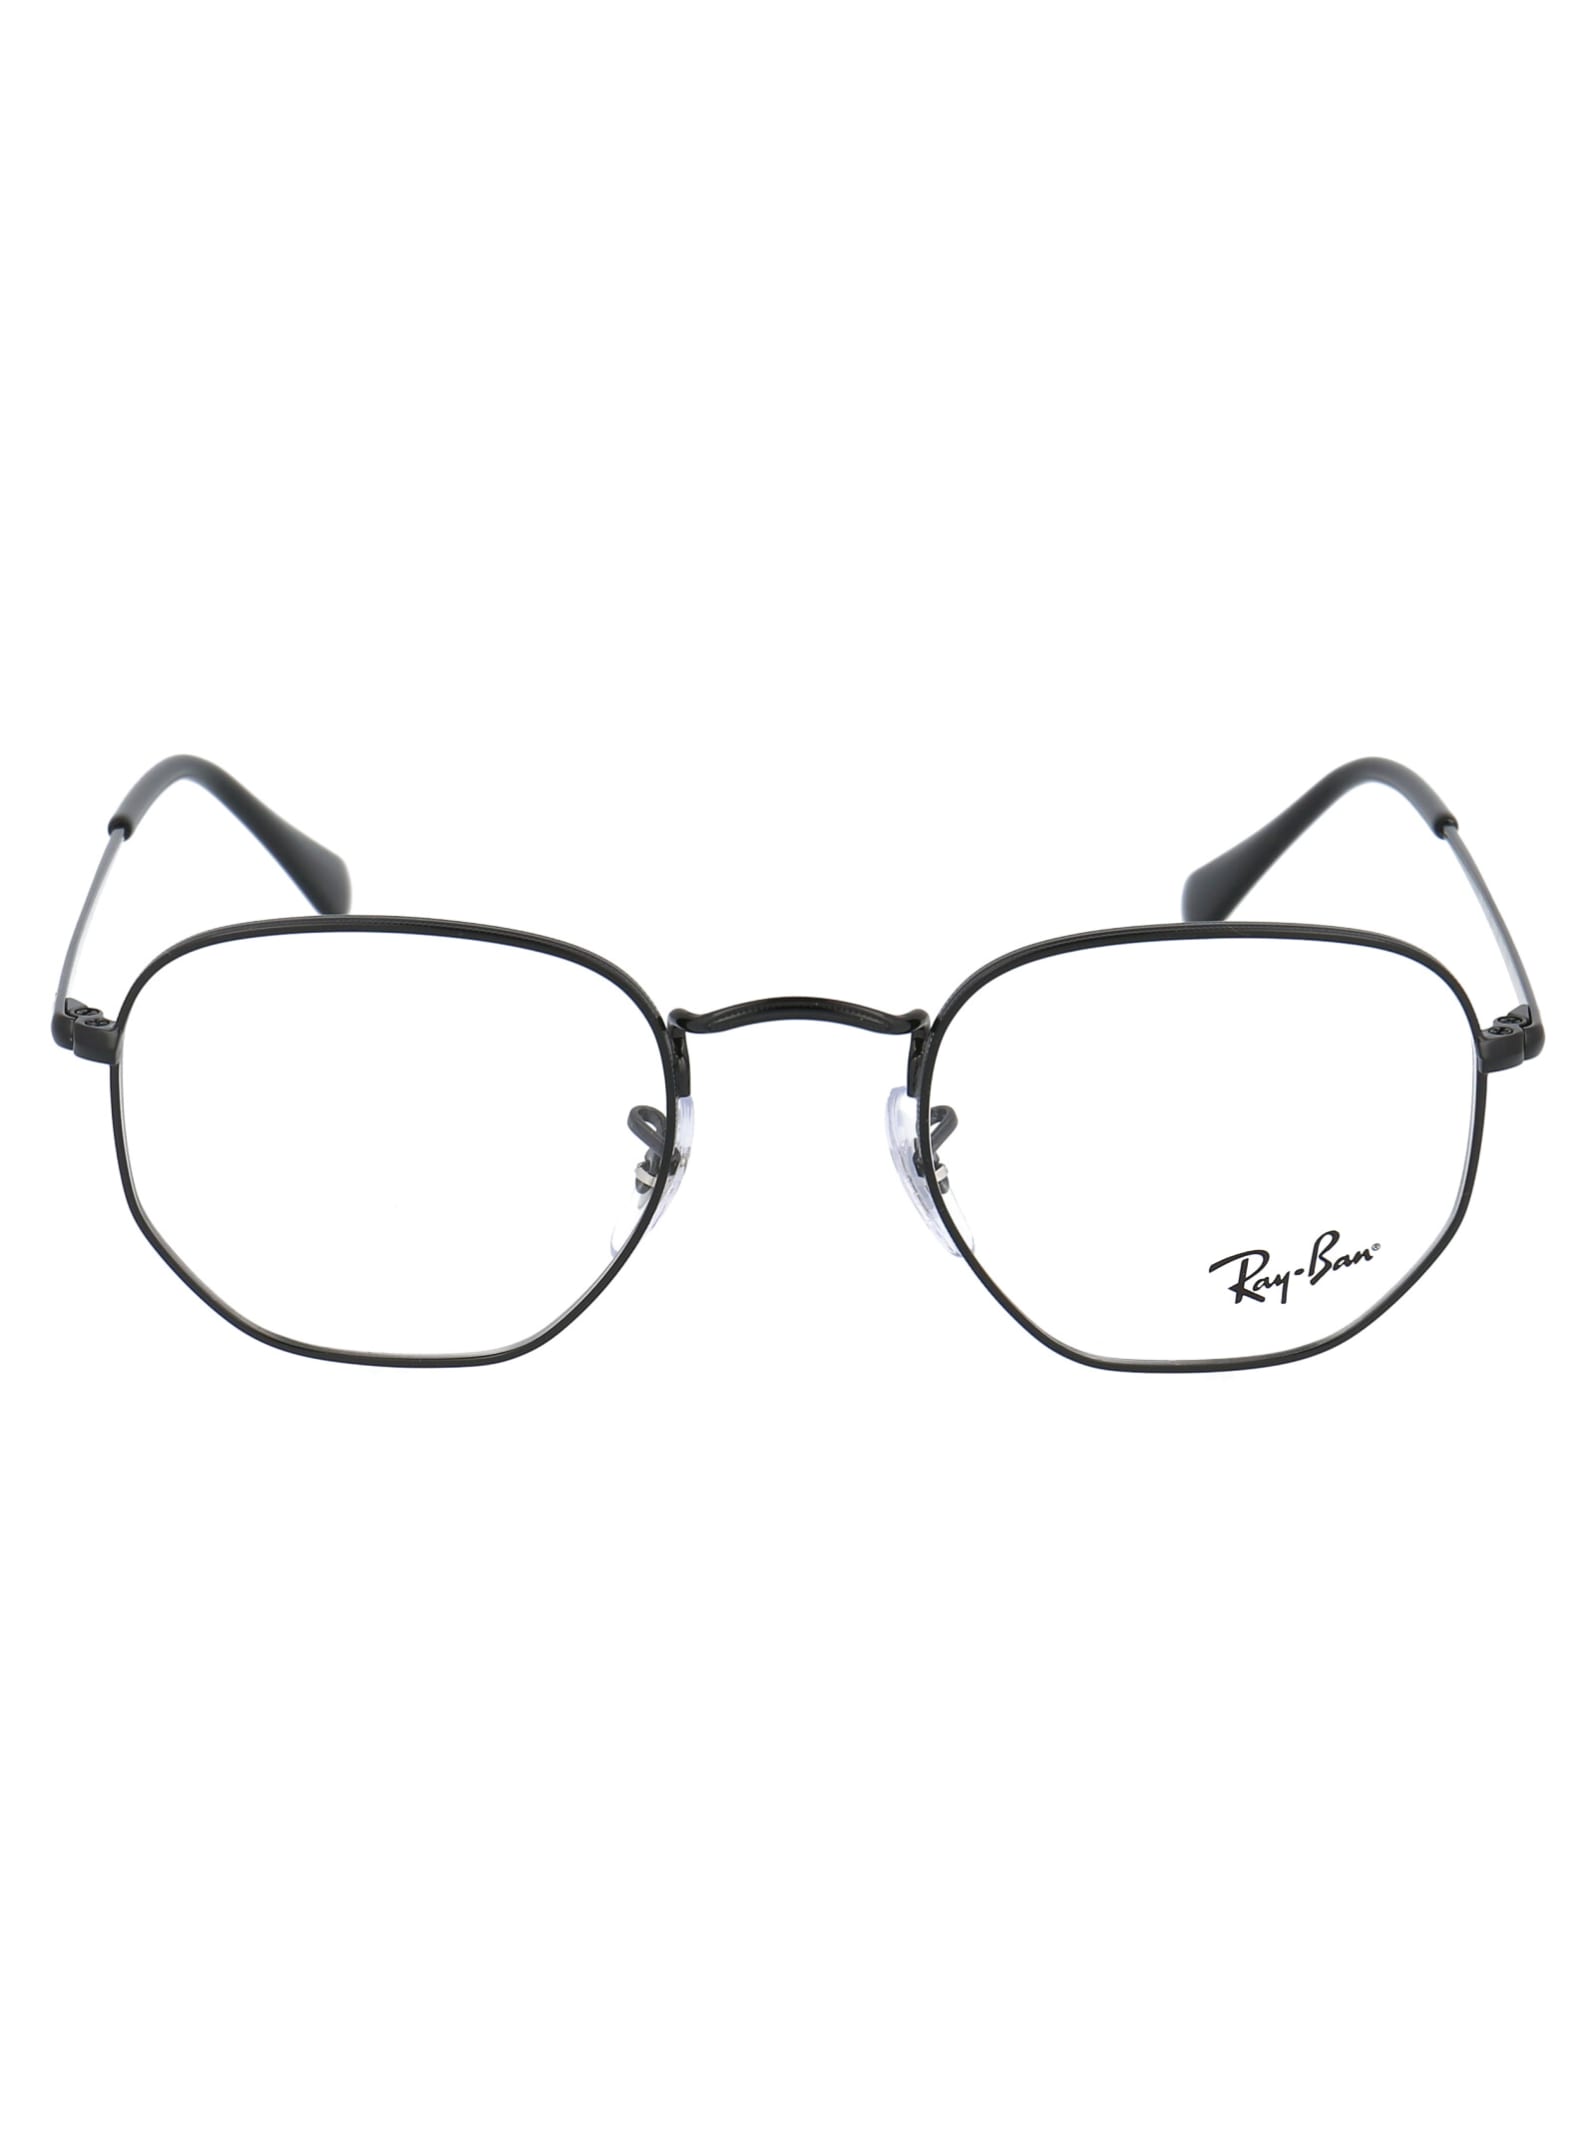 Ray Ban 0rx6448 Glasses In 2509 Black